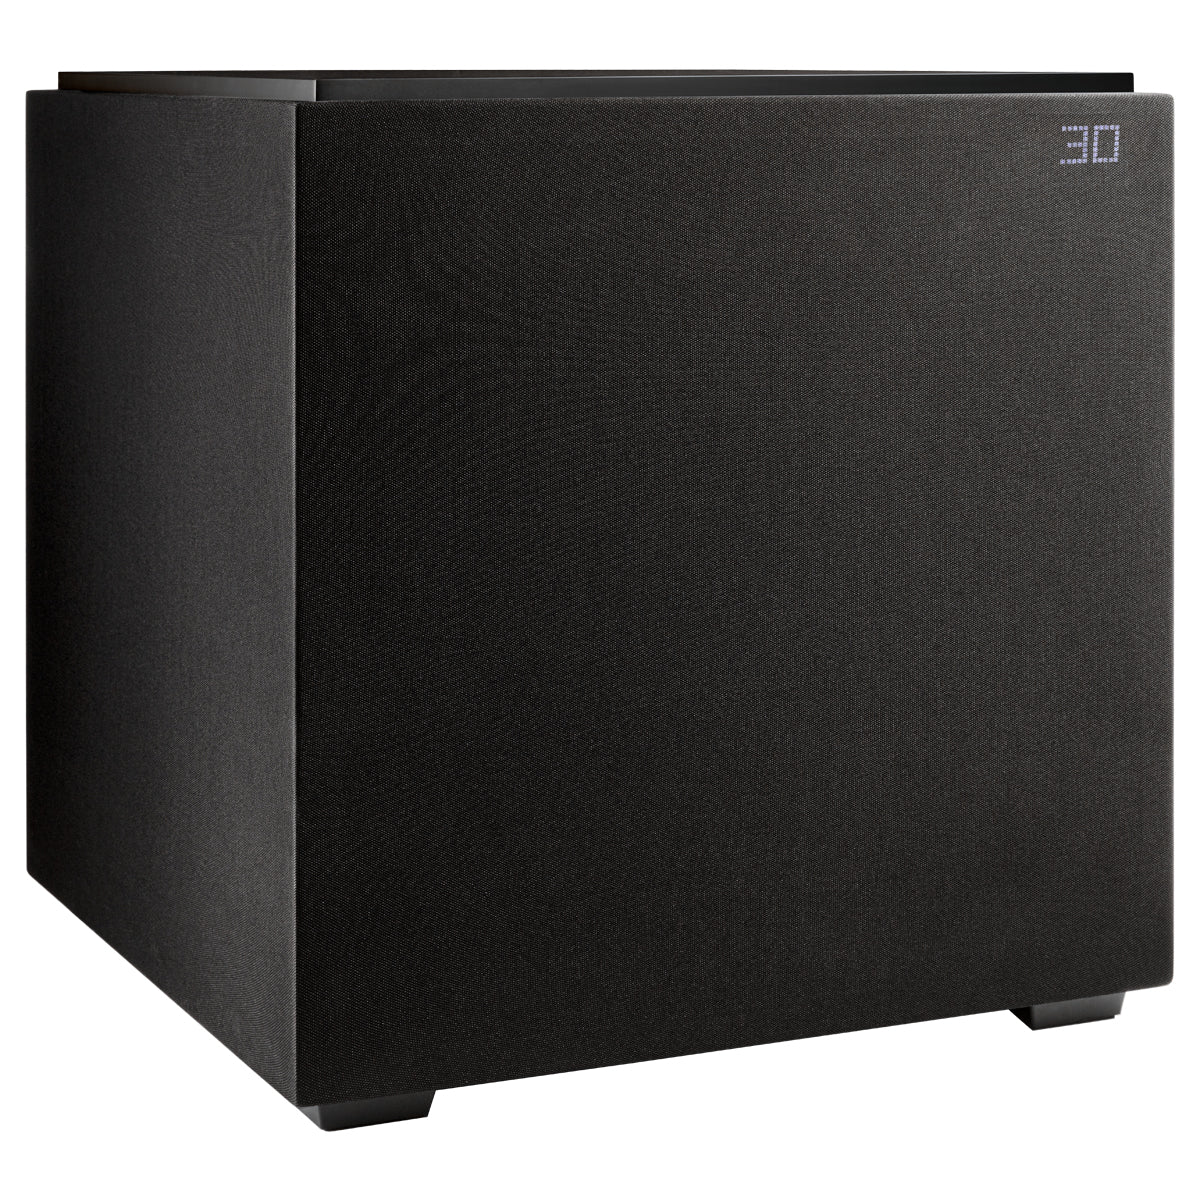 Definitive Technology DN15 Powered 15" Subwoofer - Black - The Audio Experts